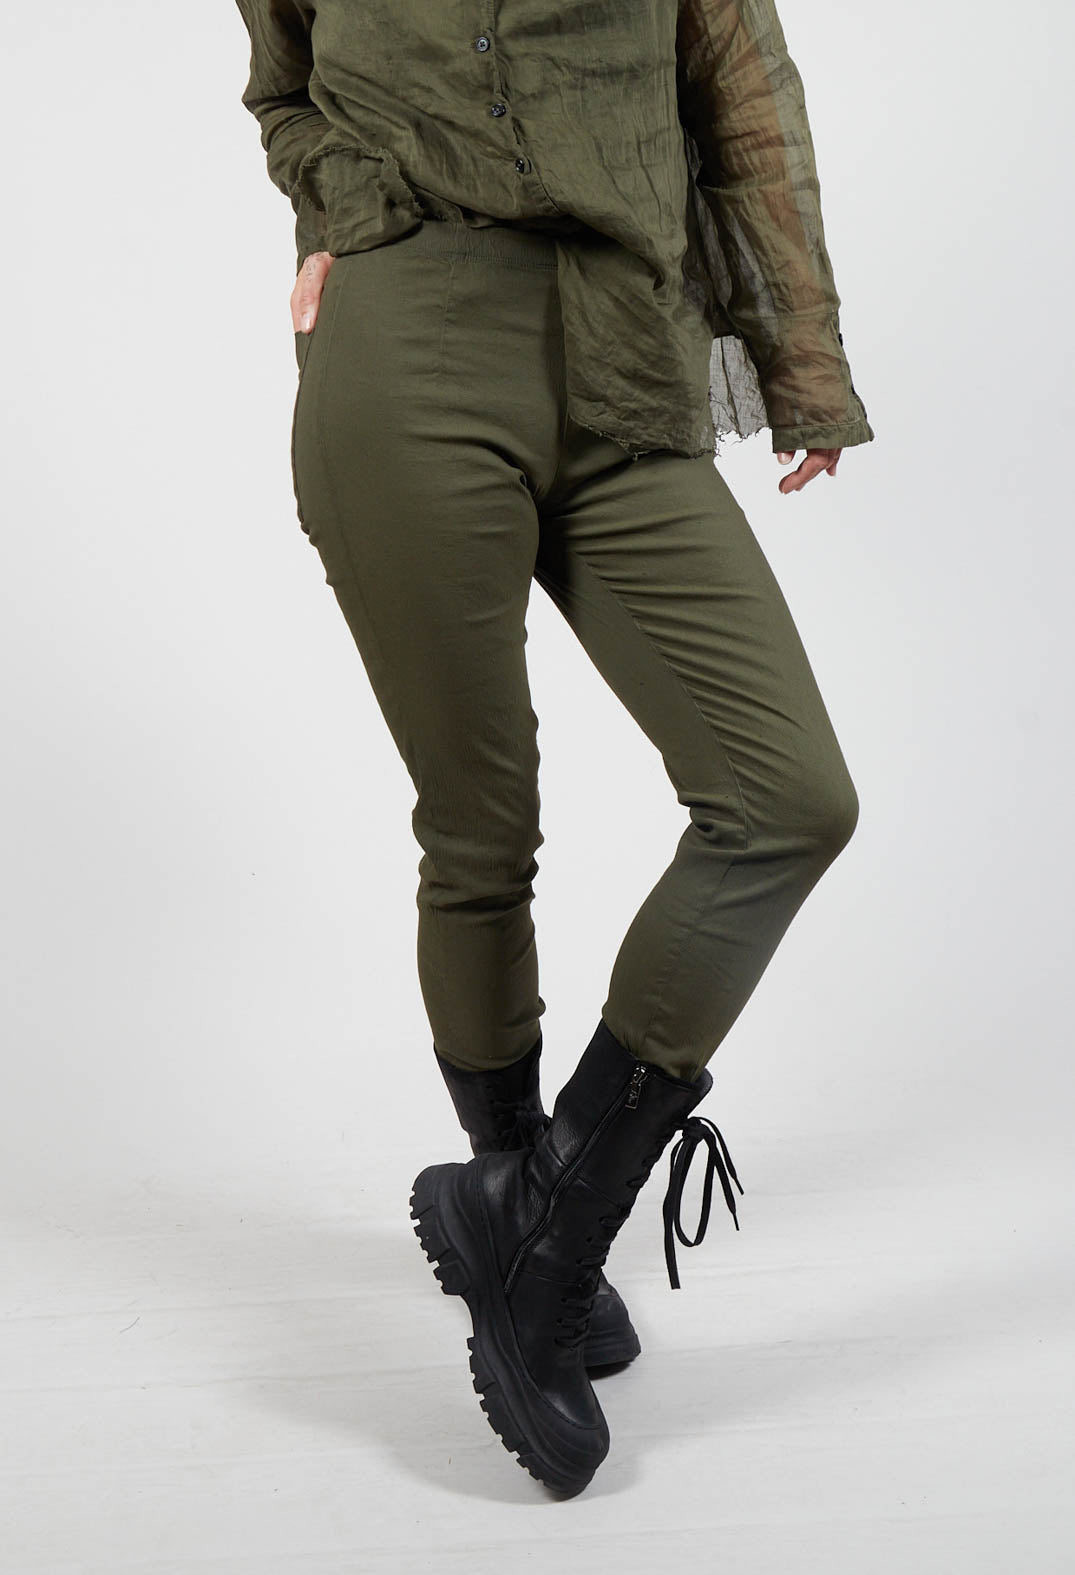 Skinny Leg Trousers With Elasticated Waist in Olive